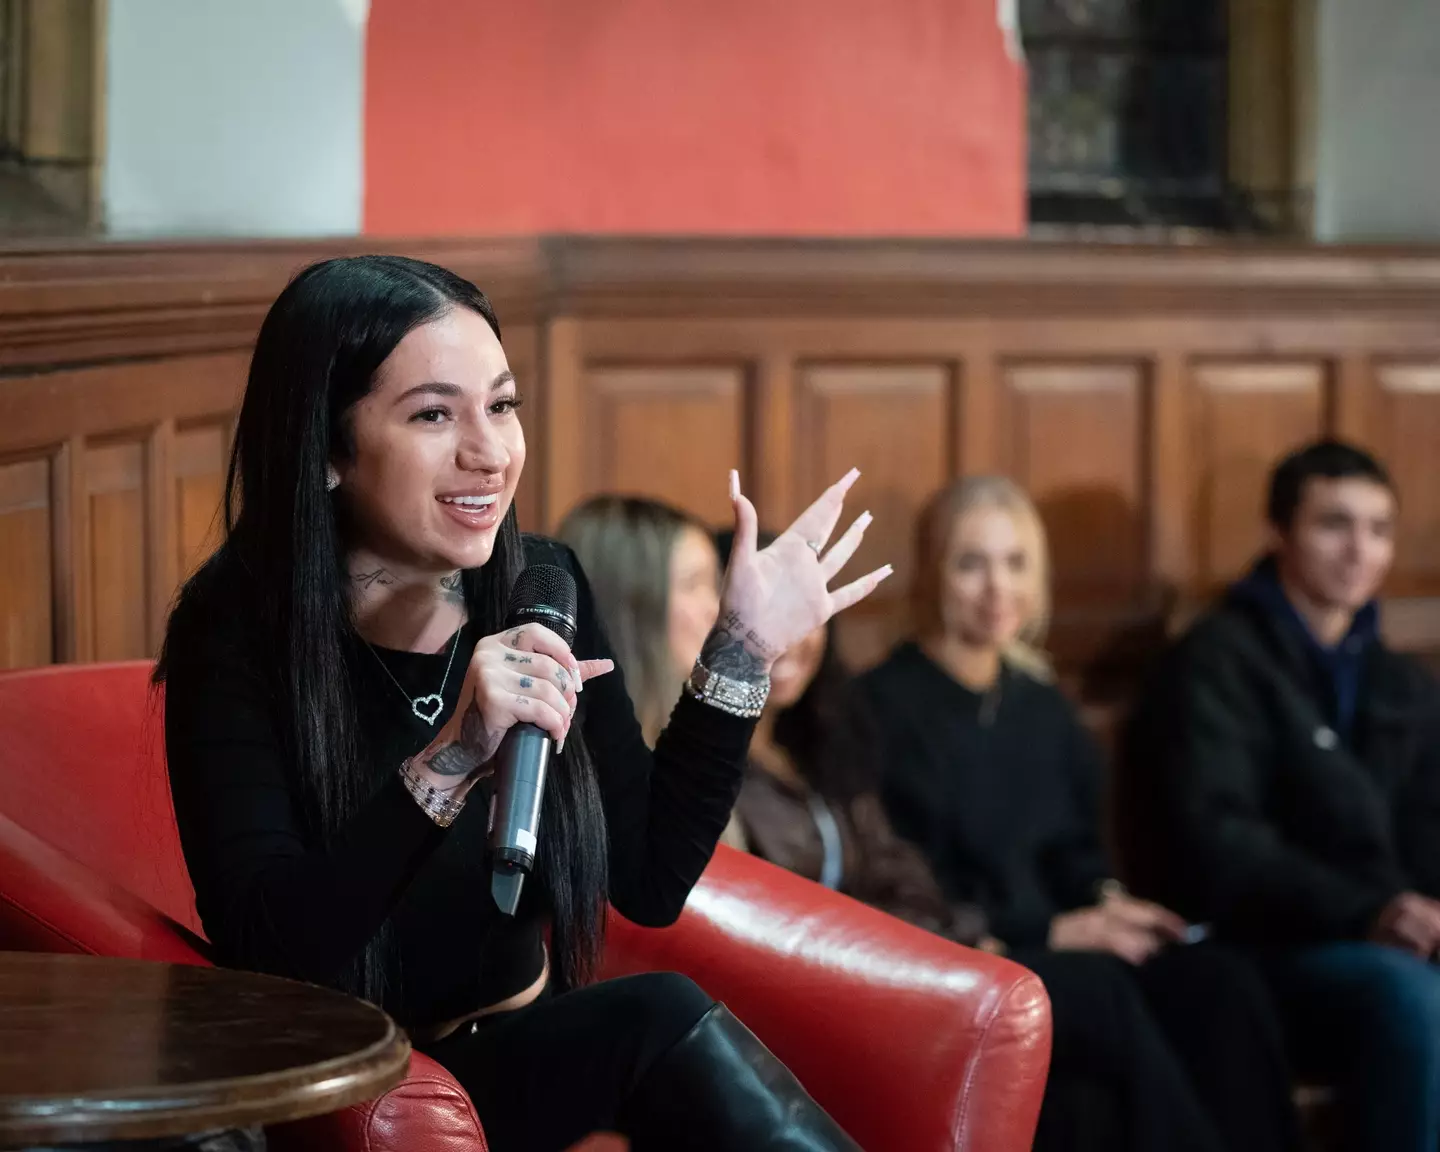 Bregoli is now bringing in millions of dollars through OnlyFans and a music career - something she spoke about during her speech at the Oxford Union.